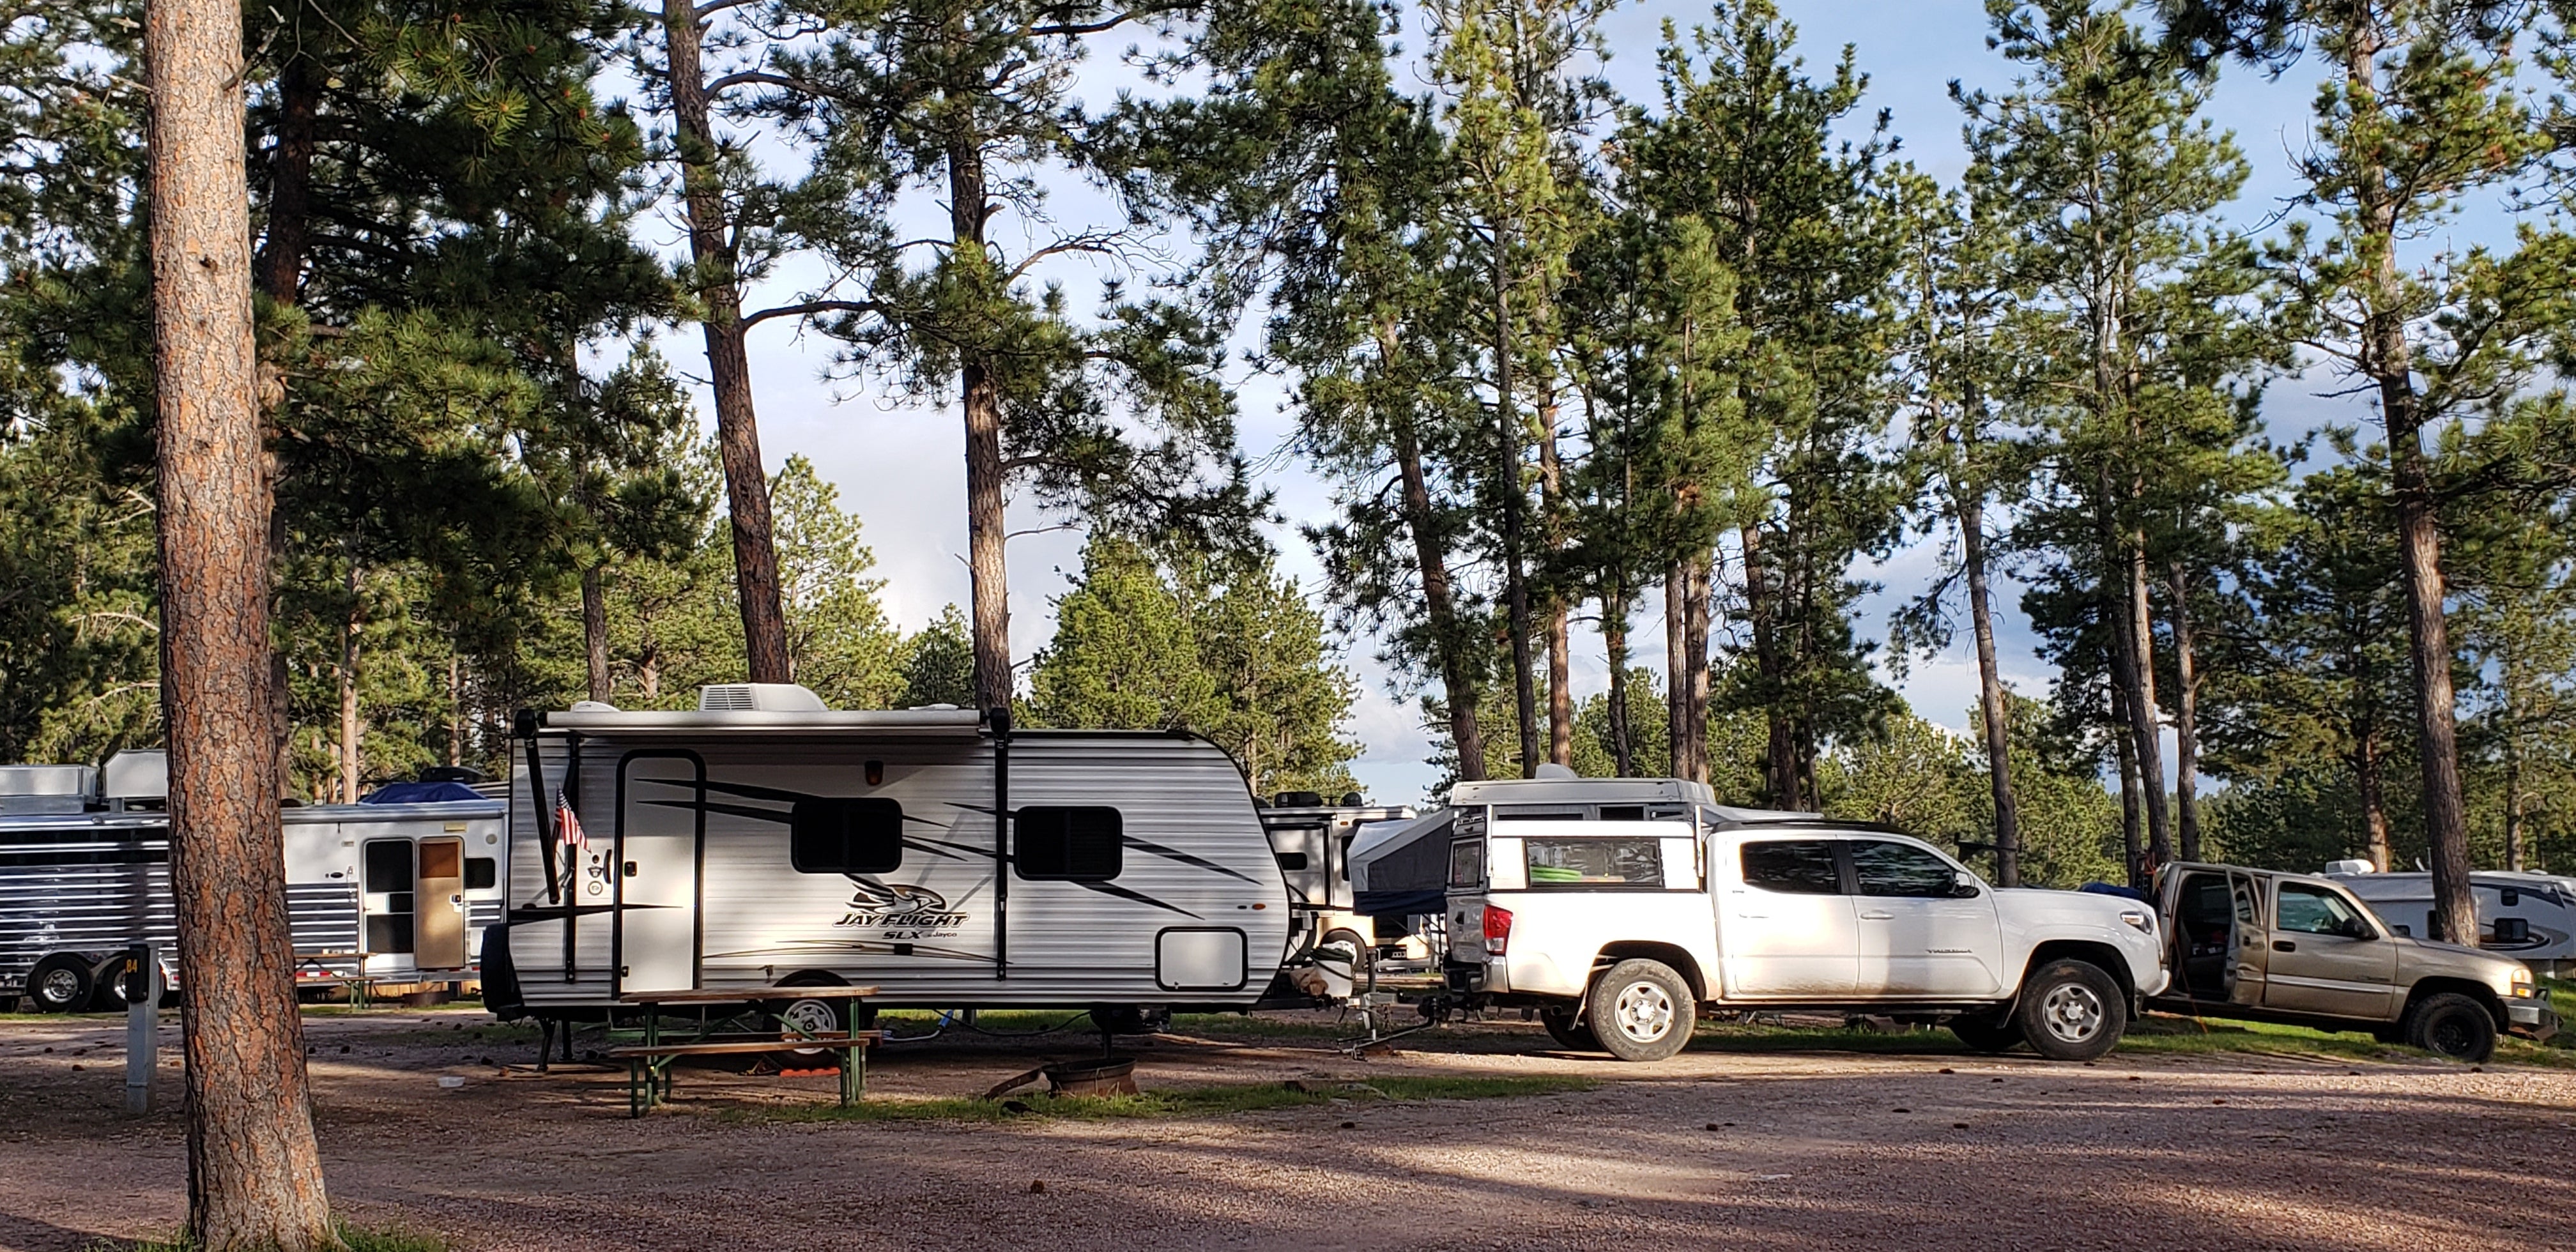 Camper submitted image from Custer-Mt. Rushmore KOA - 5